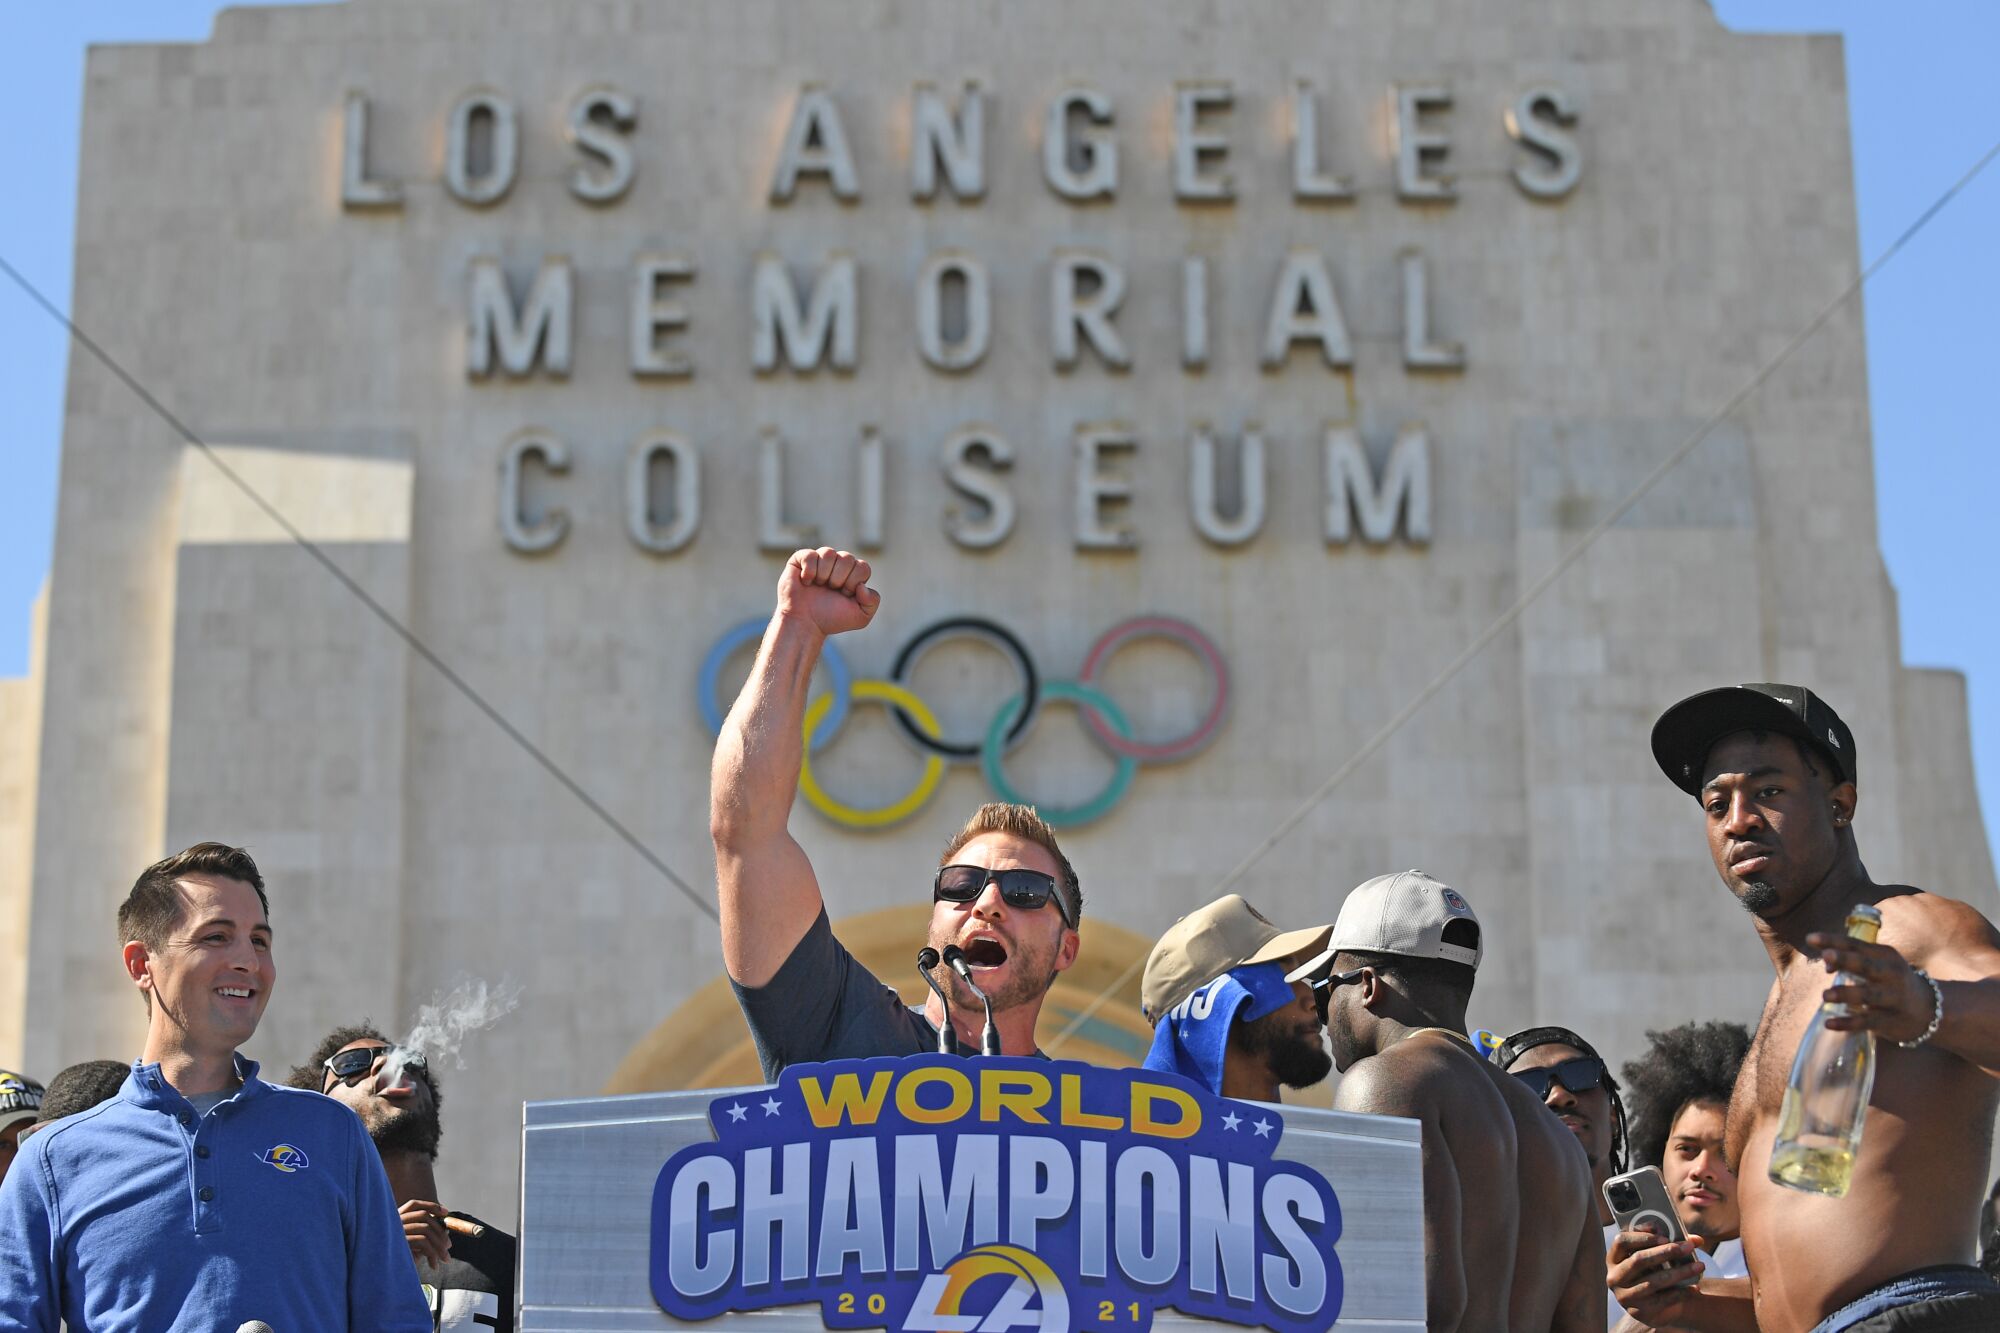 Rams coach Sean McVay raises his arm at a lectern in front of the Coliseum.